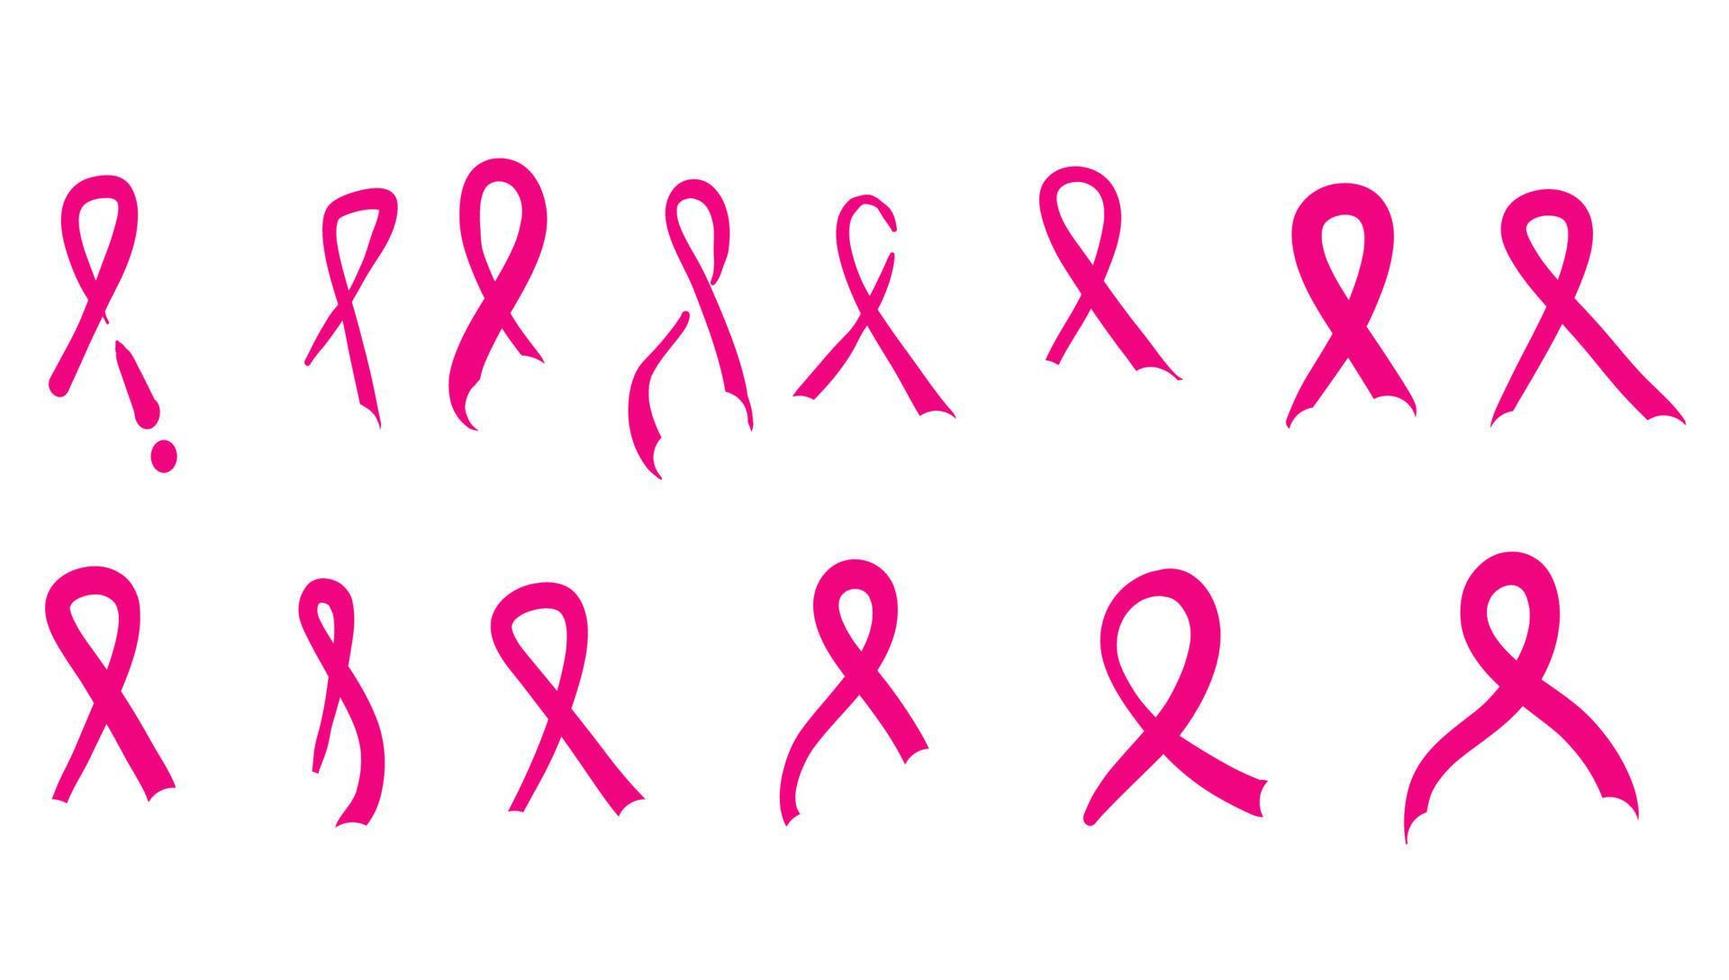 pink ribbon symbol for breast awareness month with handdrawn doodle style vector